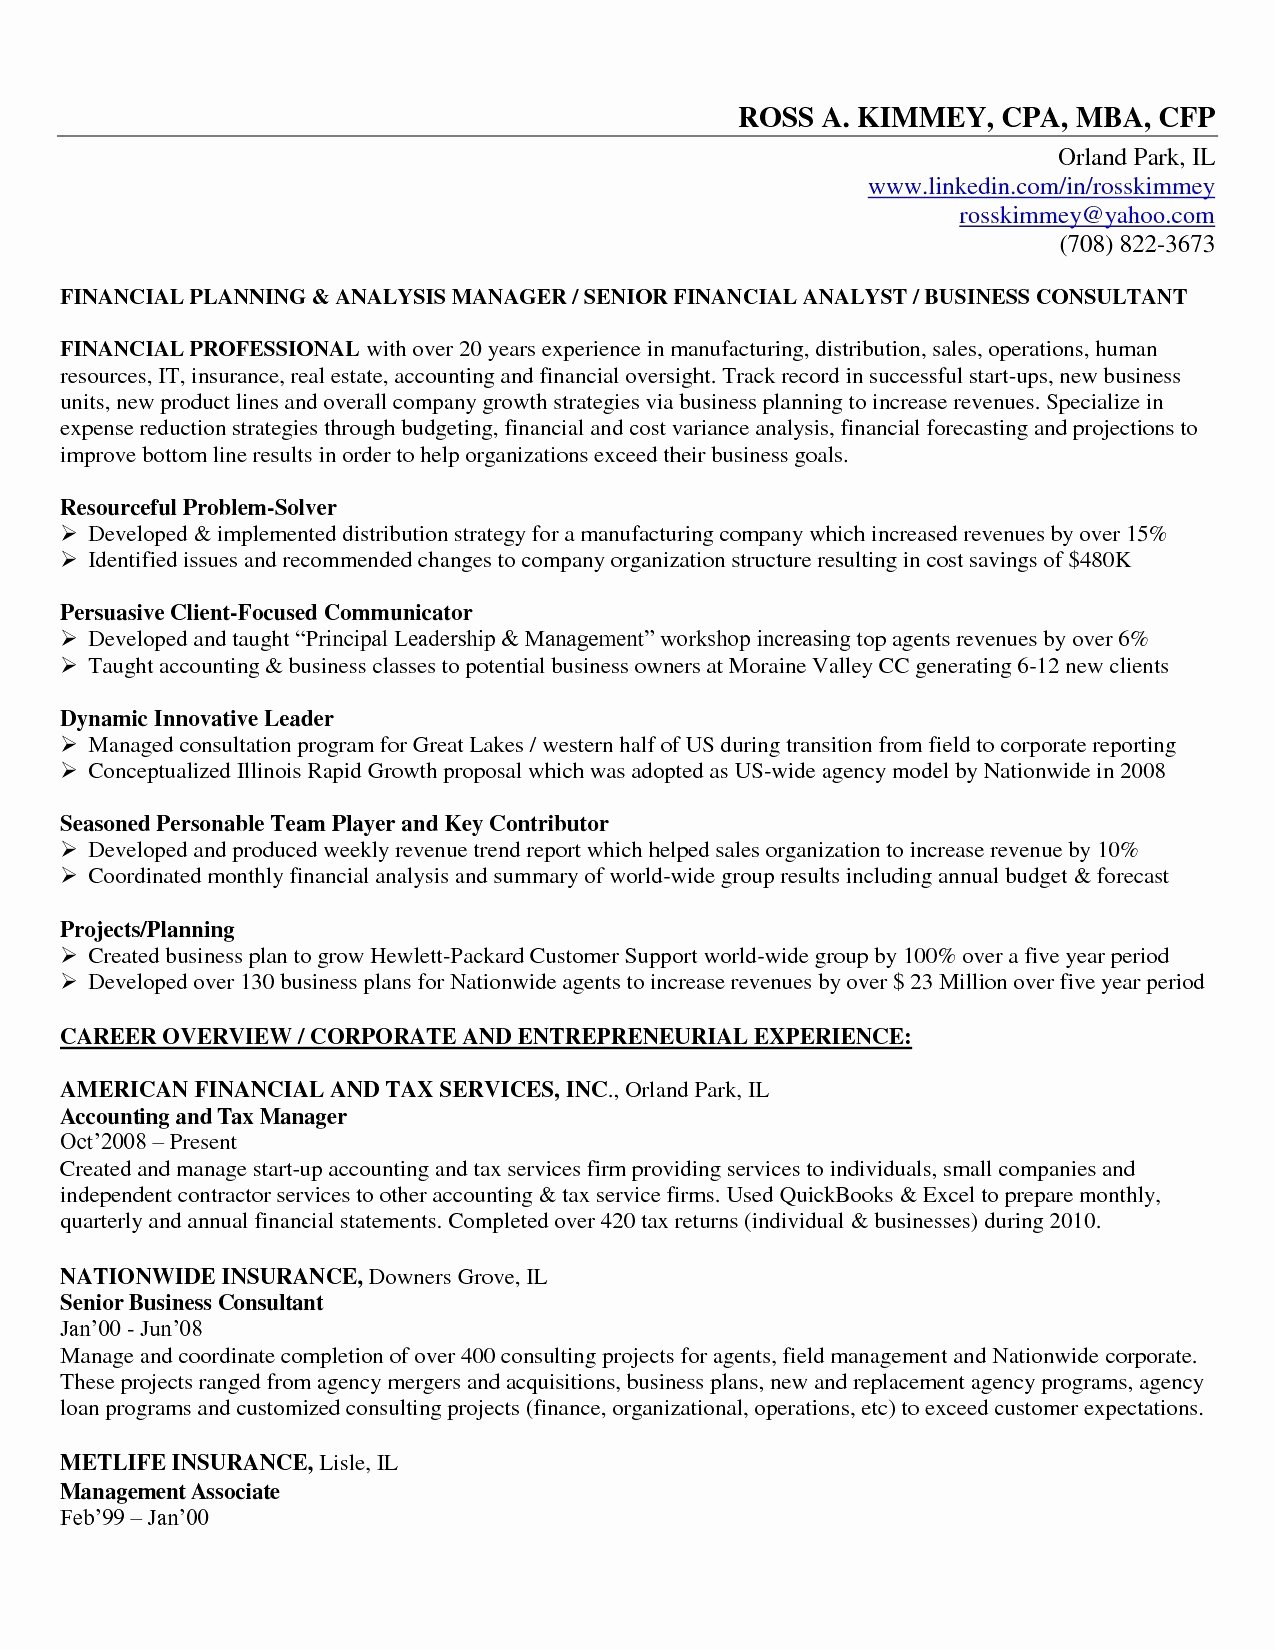 Small Business Owner Resume Sample Unique Insurance Plans for Small Business Owners – Healthcare is